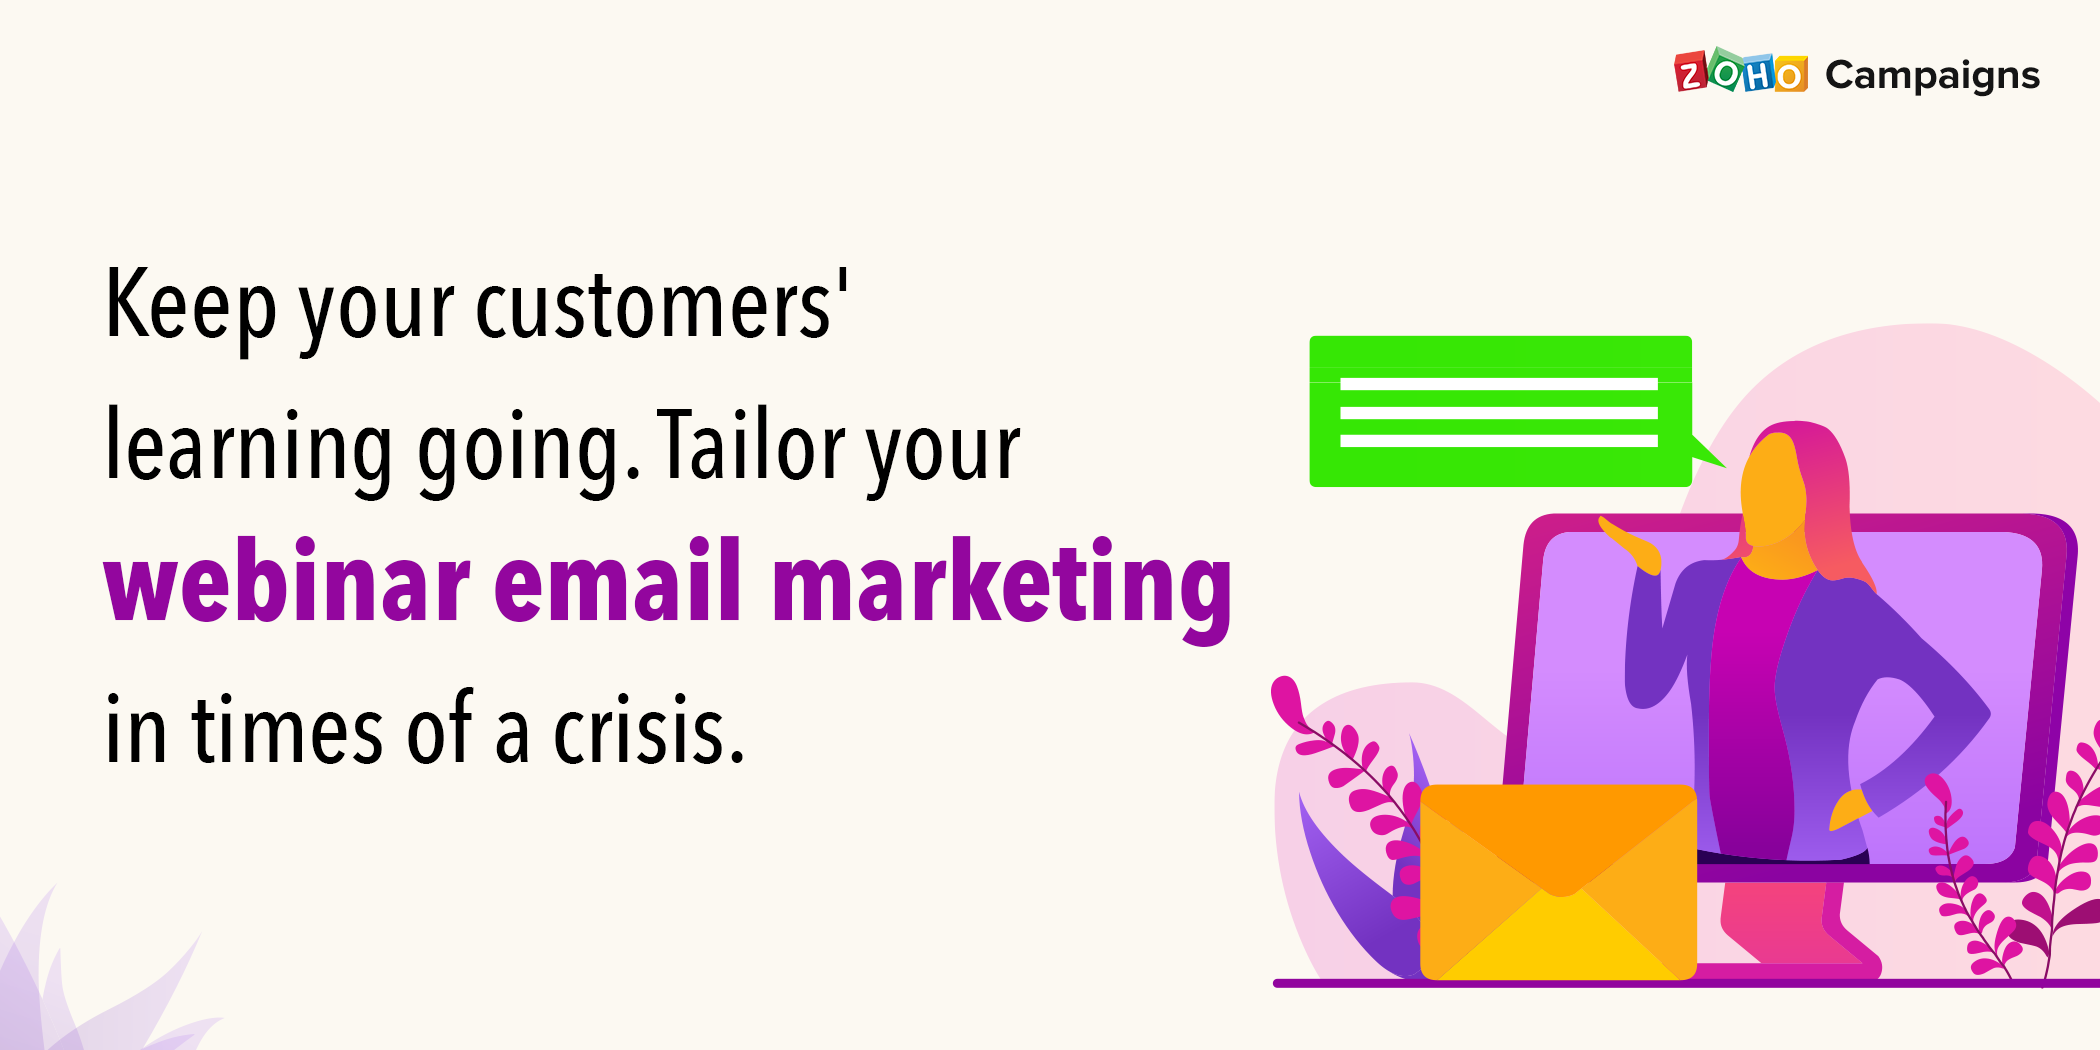 Keep your customers' learning going. Tailor your webinar email marketing in times of crisis.